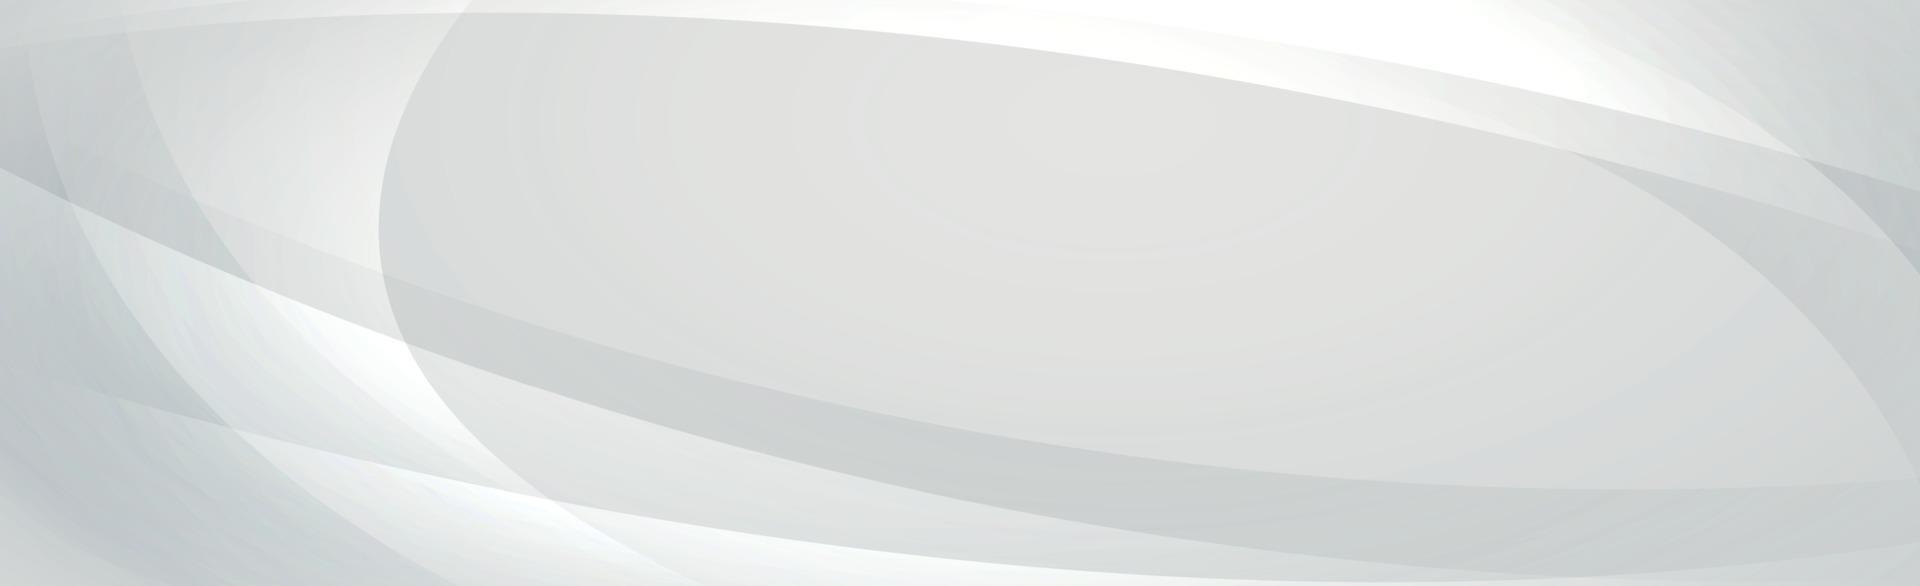 White vector panoramic background with wavy lines